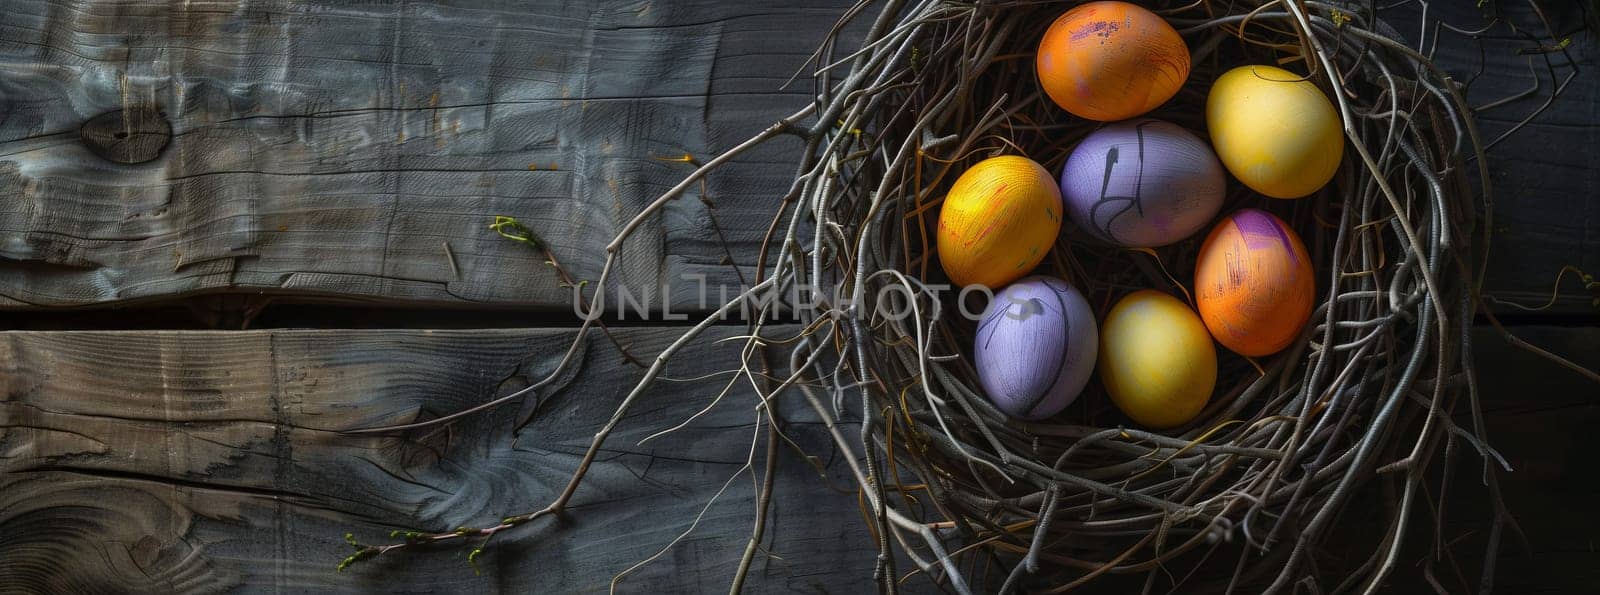 A springthemed still life photography of a bird nest with colorful Easter eggs resting on a wooden table, surrounded by natural materials like twigs and grass